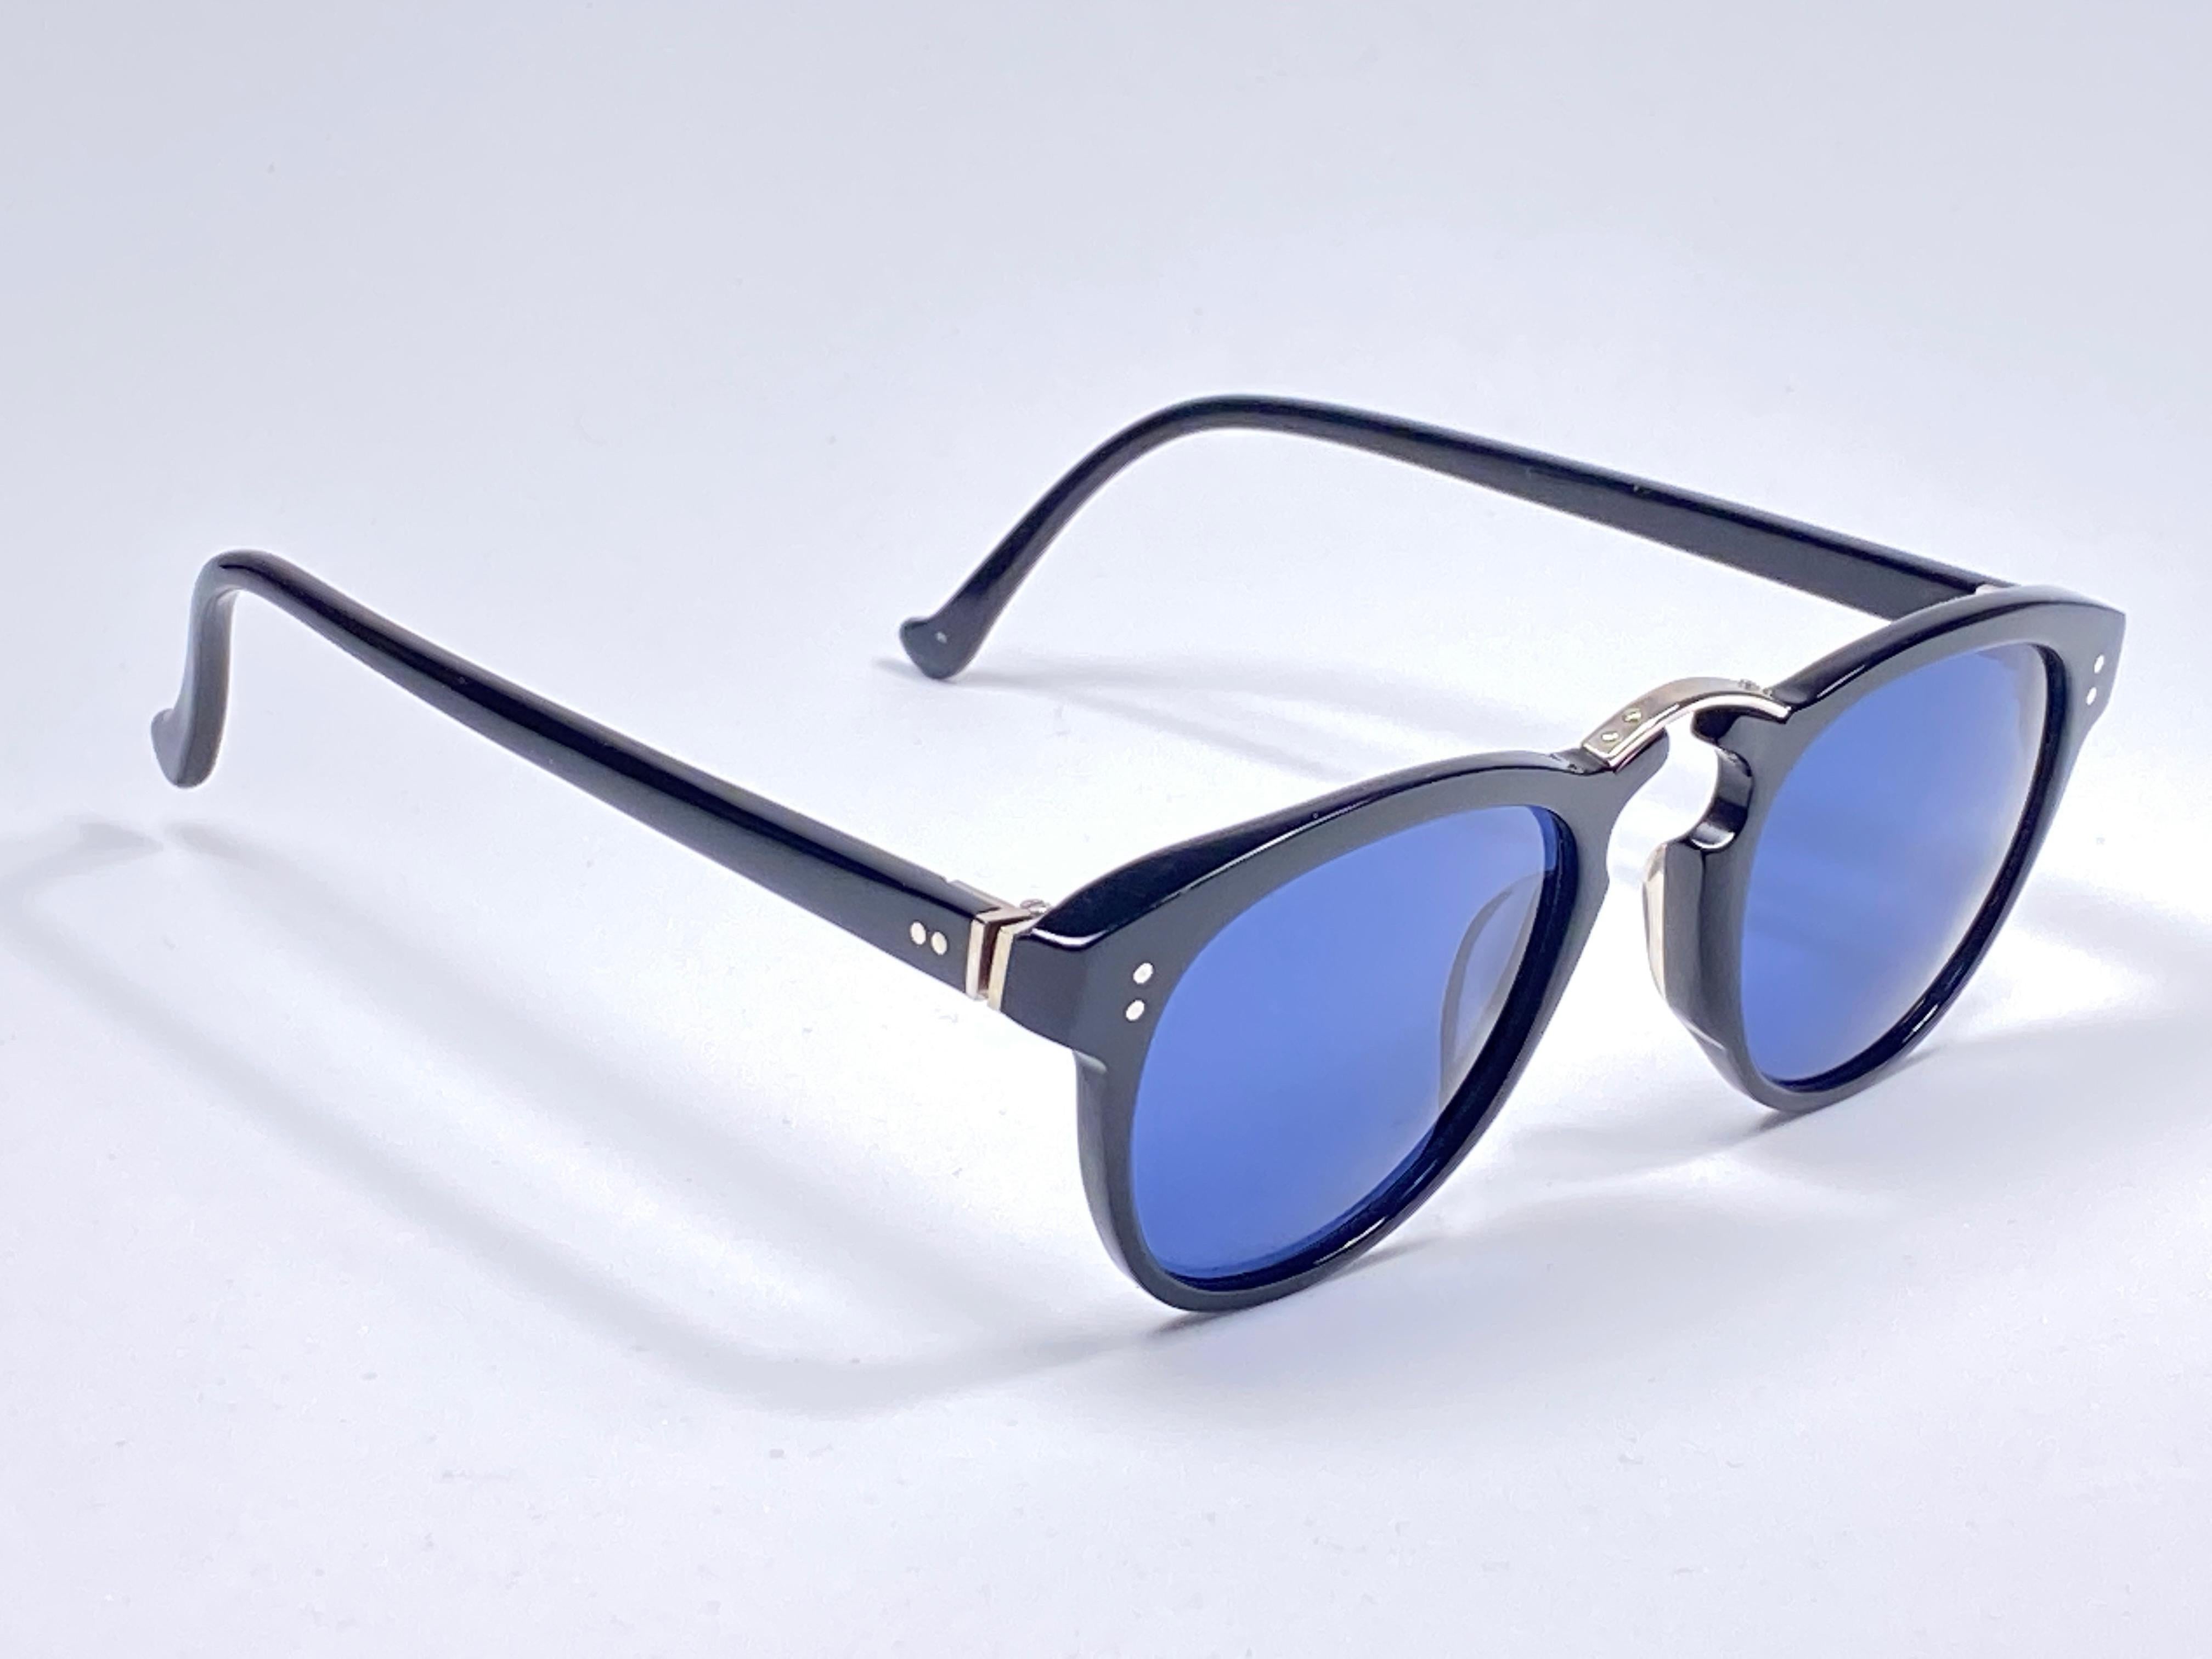 New Vintage Jean Paul Gaultier Junior medium frame in sleek black with silver accents.

Design and produced in the 1900's a timeless and iconic piece.
Minor sign of wear due to storage.
A true fashion statement.

Front 13.5 cms 
Lens Height 4.6 cms